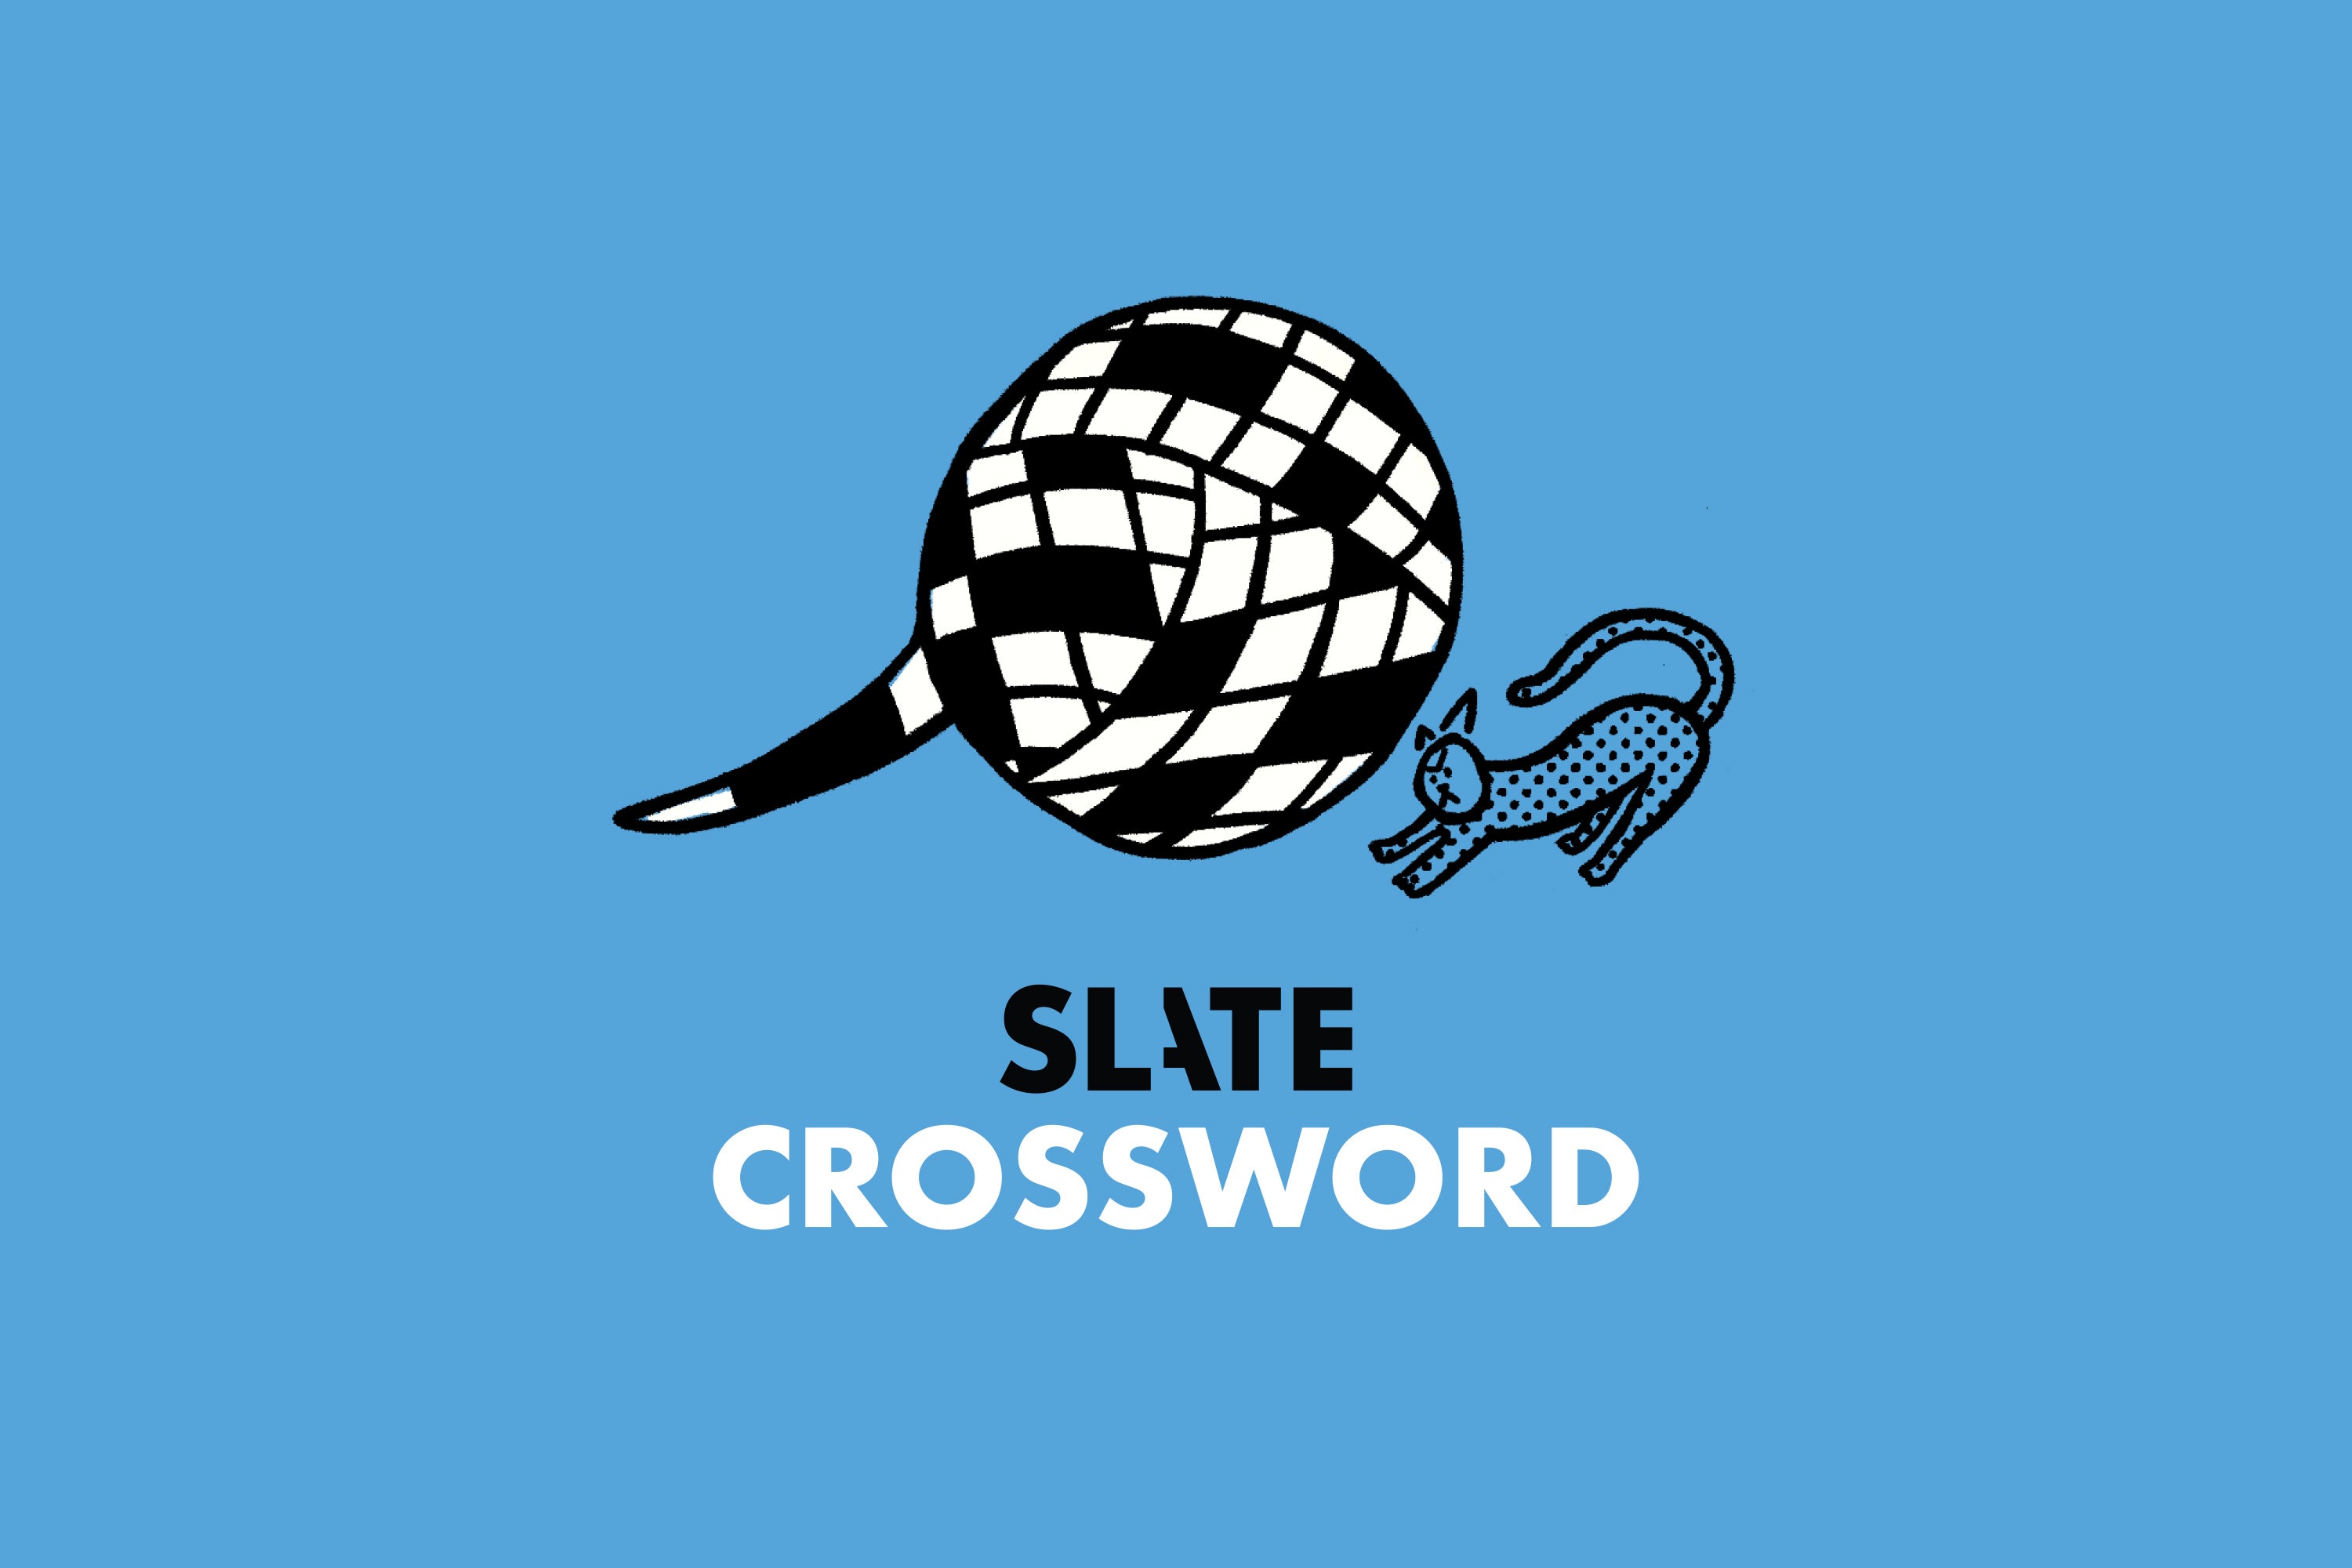 Slate Crossword: Sausage That Sounds Boozy and Snooty (Eight Letters)